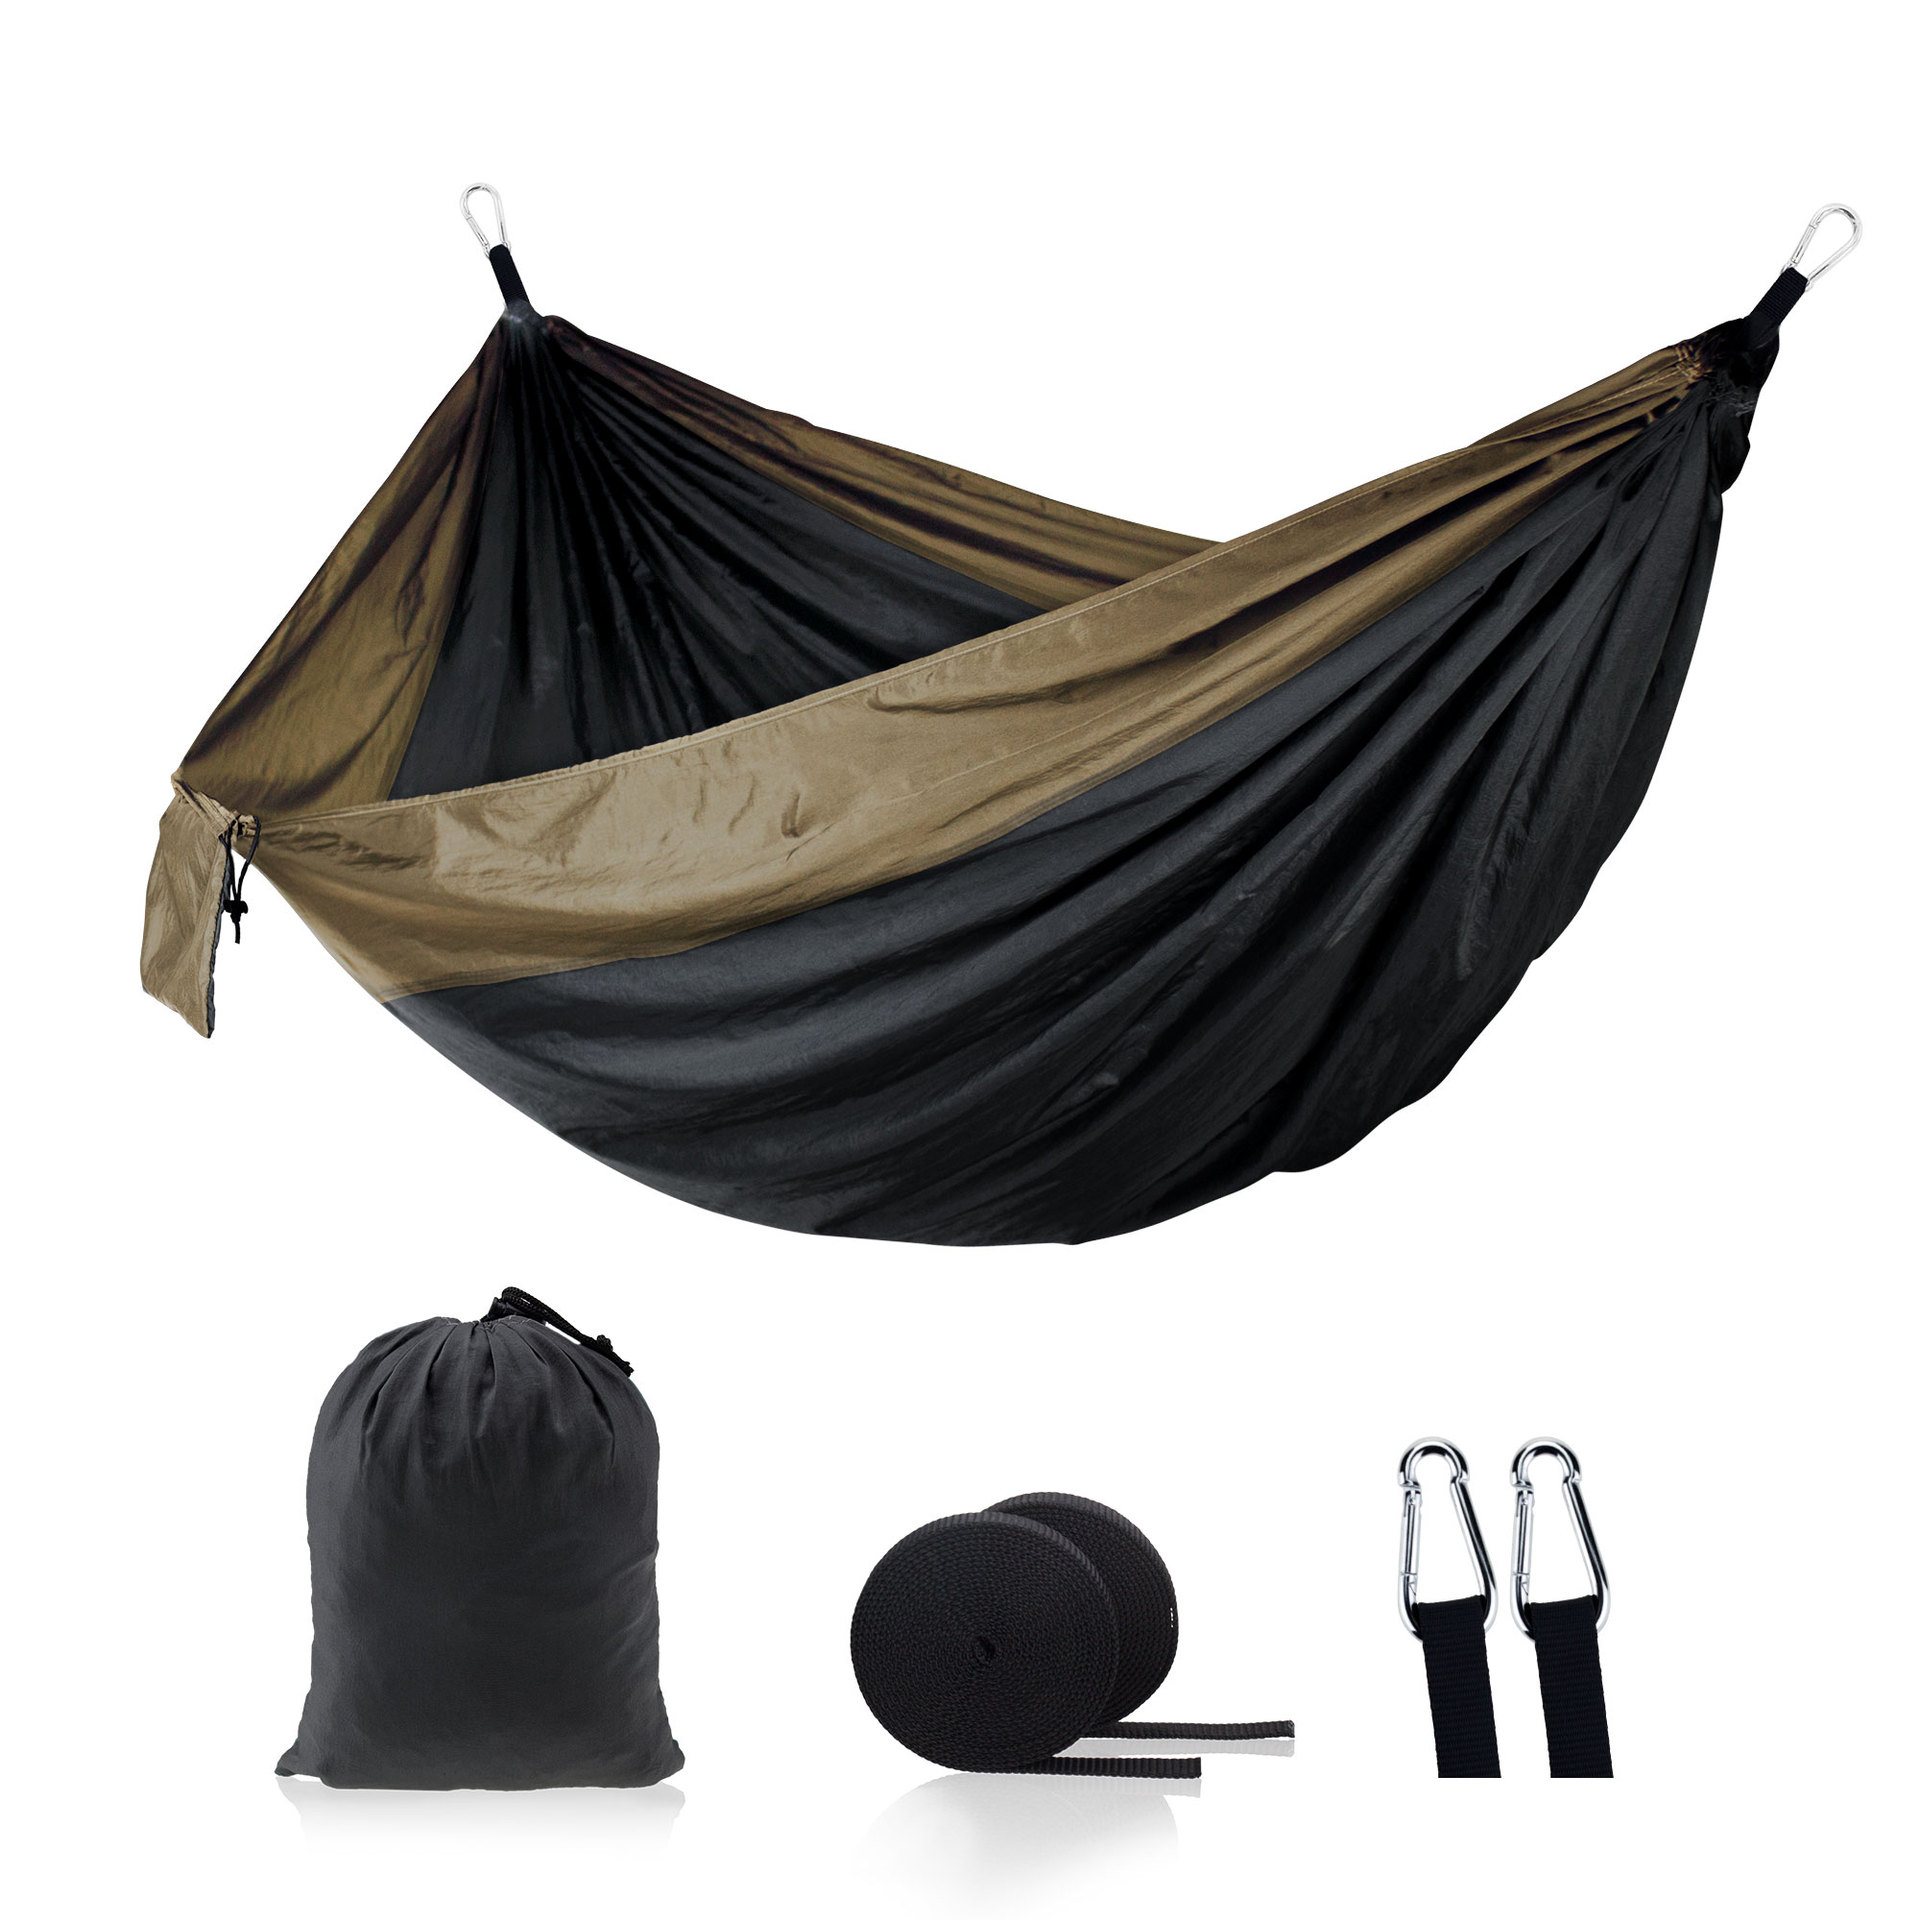 High quality Outdoors Backpacking Survival or Travel Single & Double parachute Hammocks/camping hammock